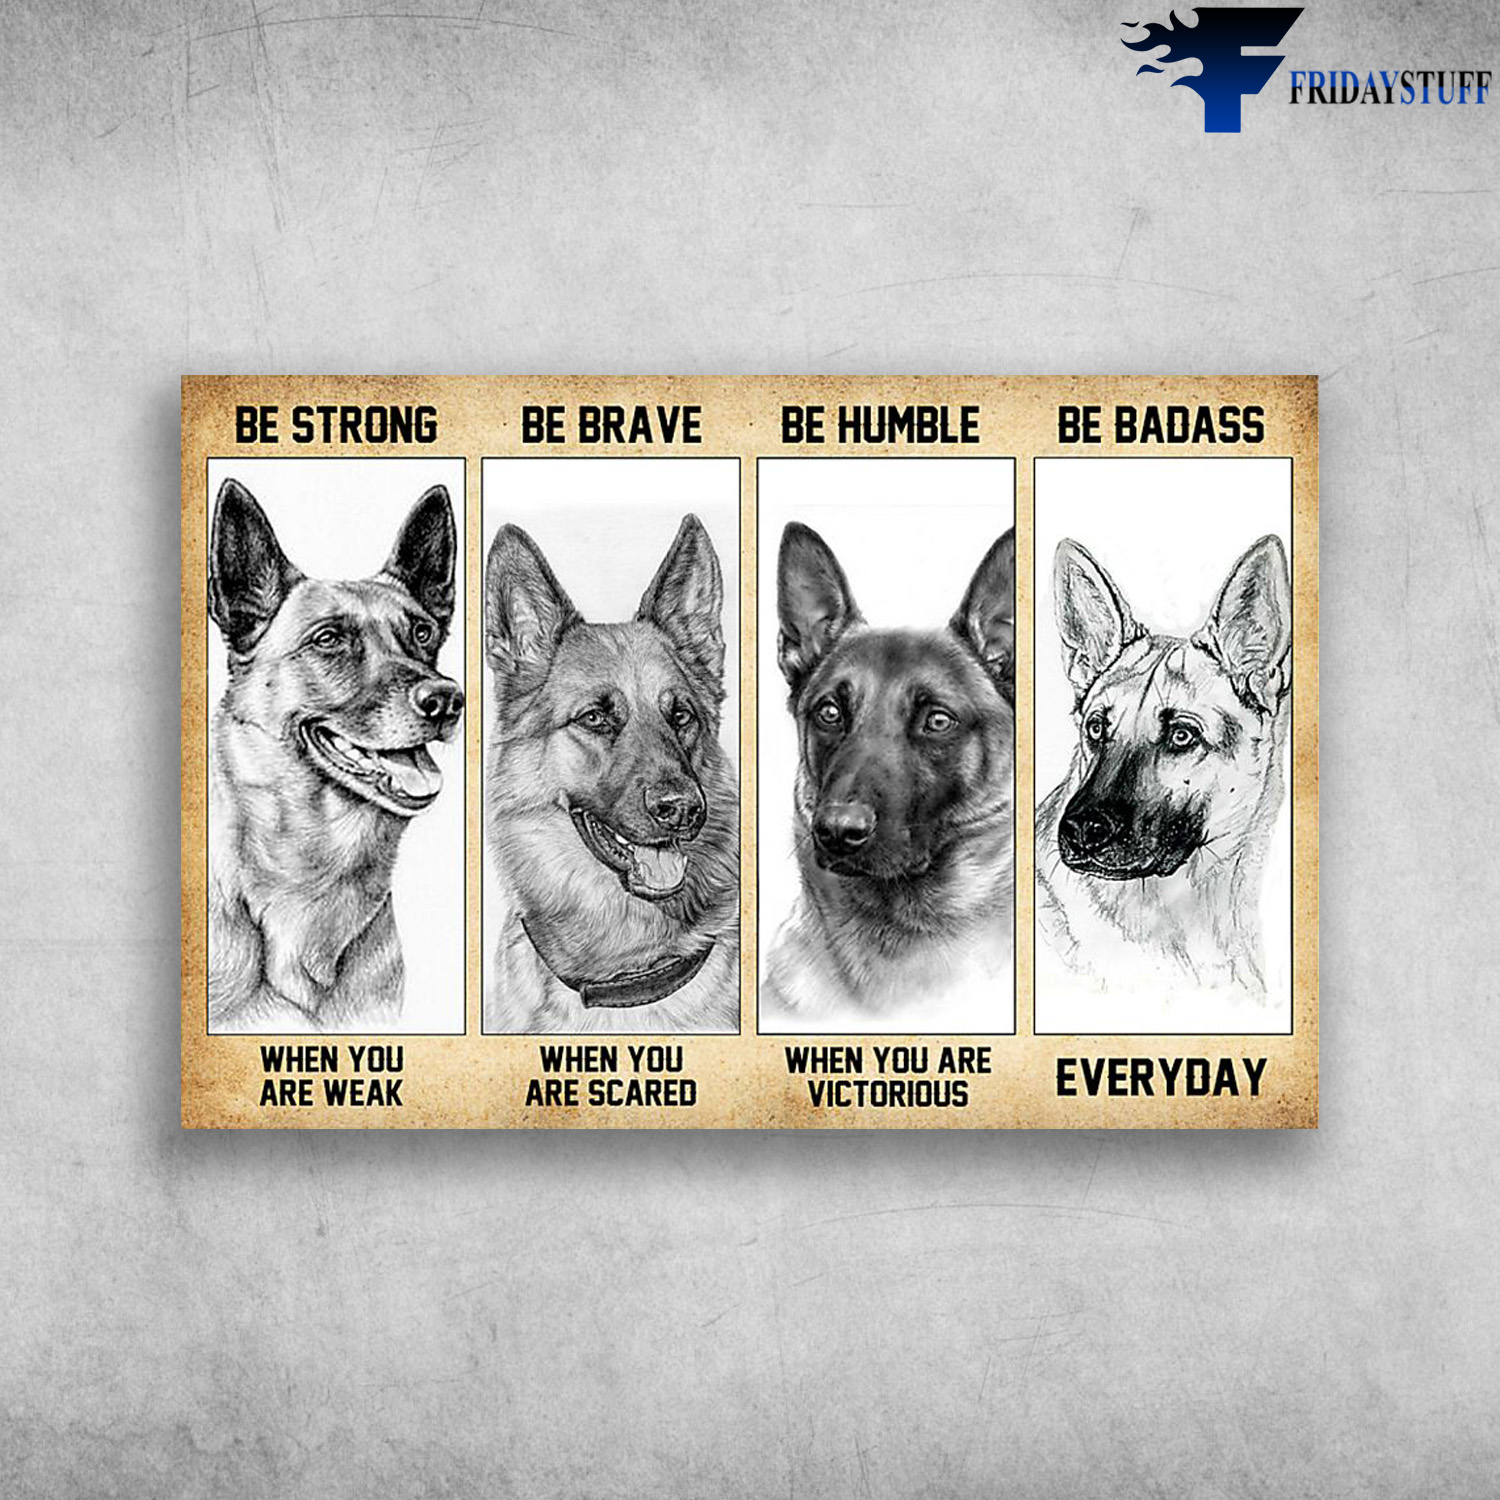 German Shepherd - Be Strong When You Are Weak, Be Brave When You Are Scared, Be Humble When You Are Victorious, Be Badass Everyday